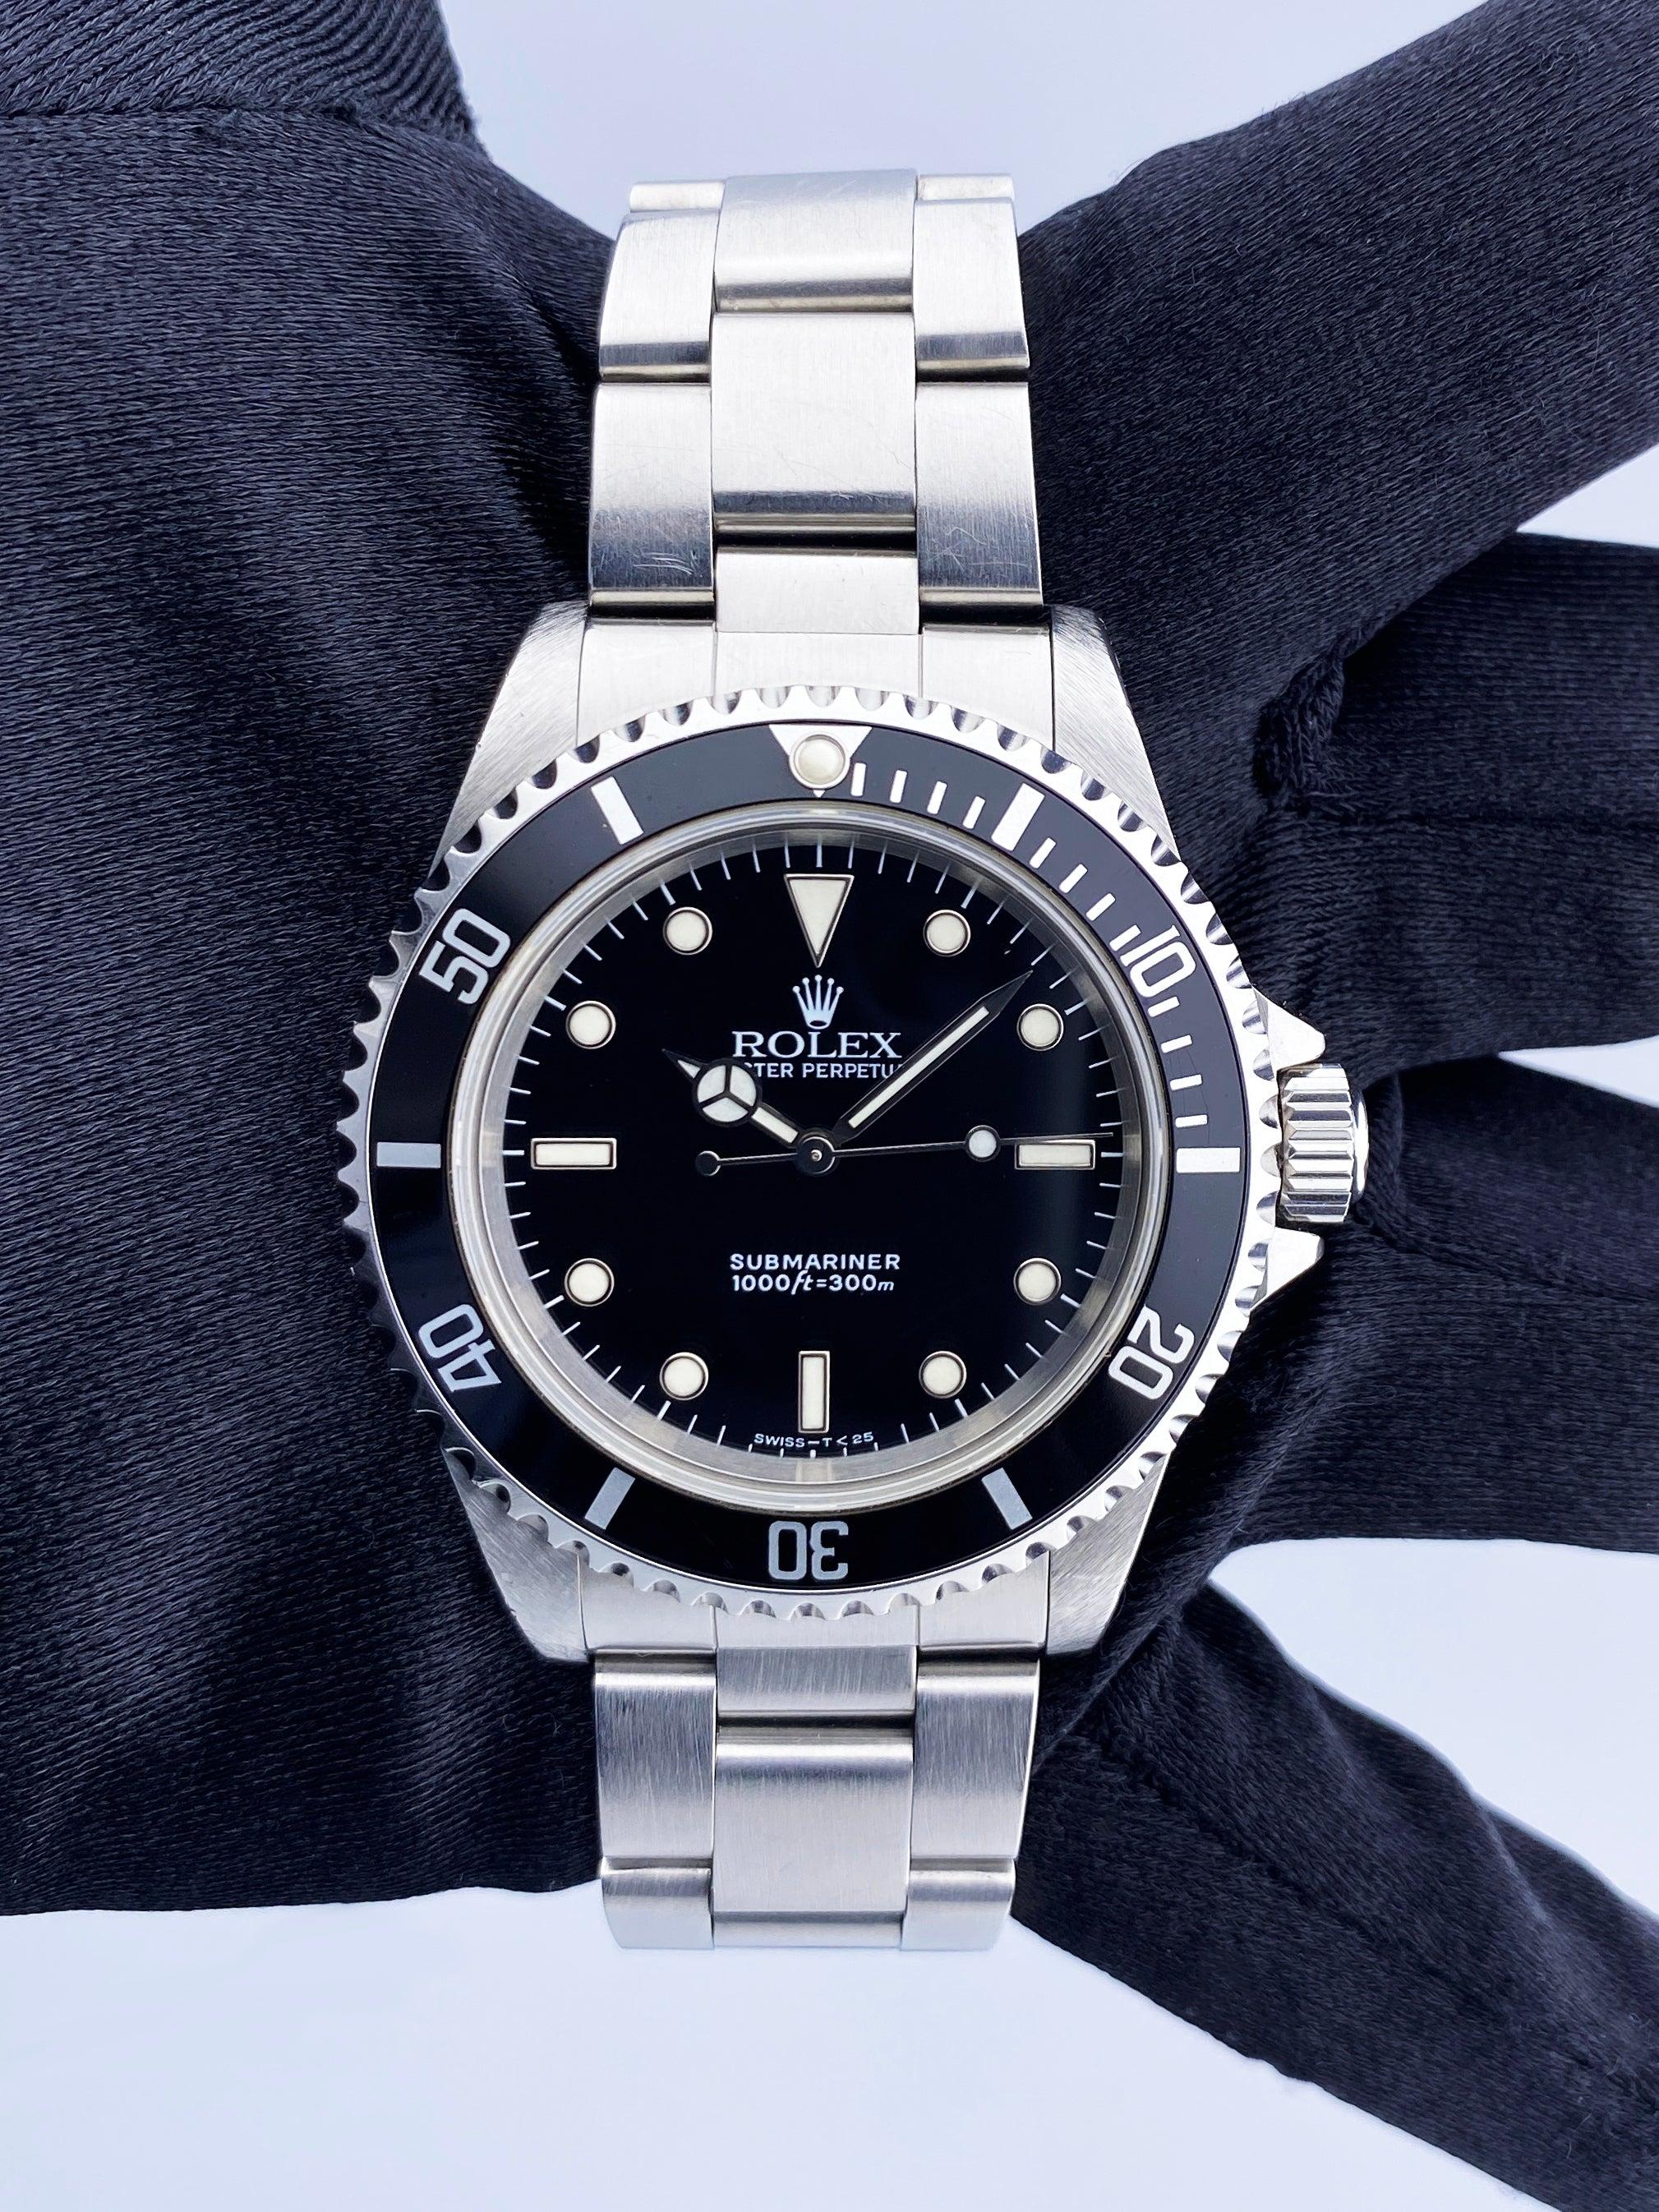 Rolex Oyster Perpetual Submariner No Date 14060 Mens Watch. 40mm stainless steel case. Unidirectional rotating bezel with black bezel insert. Black dial with luminous Mercedes steel hands and index hour marker. Stainless steel Oyster bracelet with a